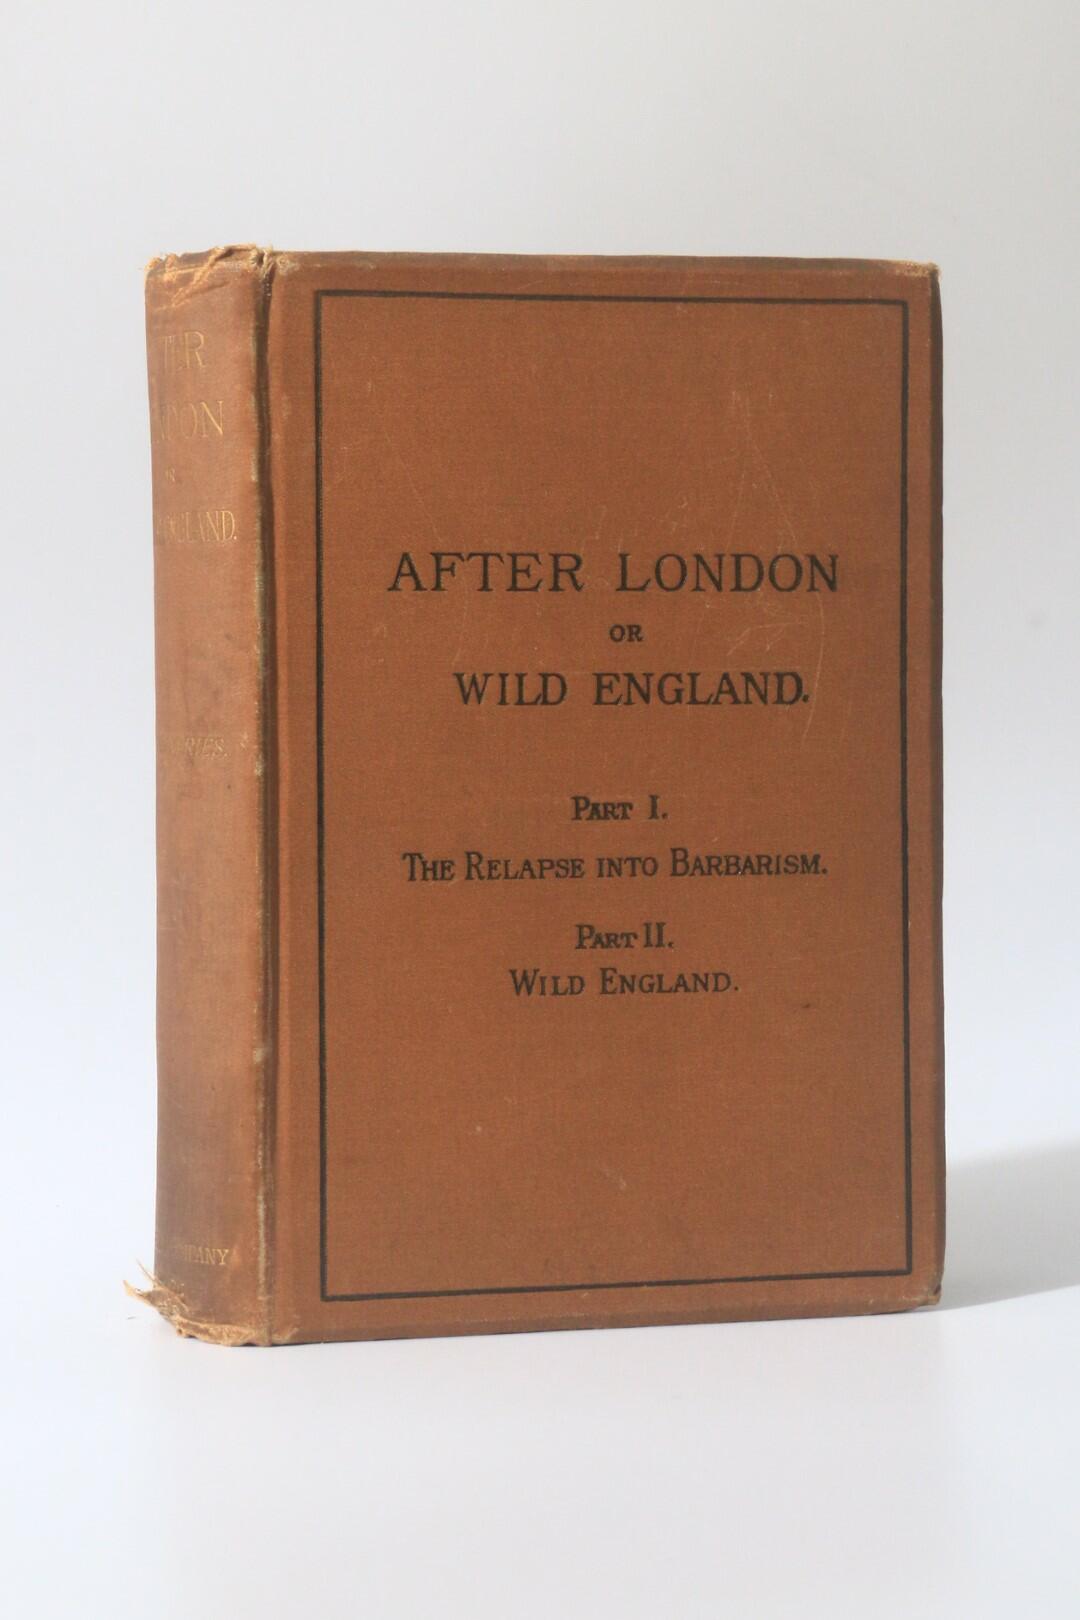 Richard Jefferies - After London or Wild England - Cassell & Company, 1885, First Edition.